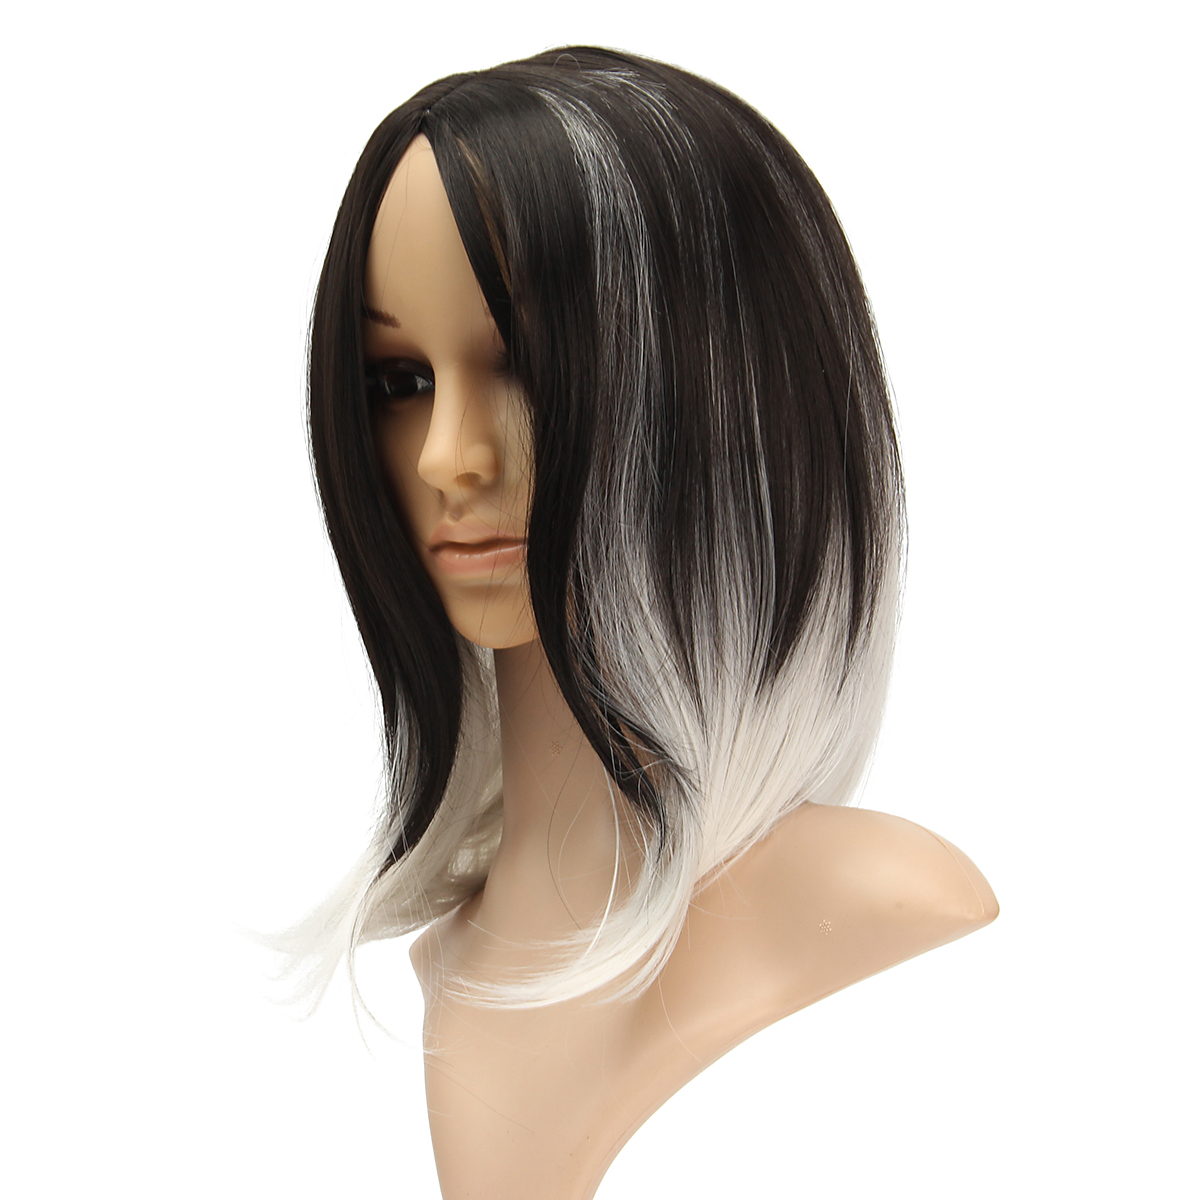 Greyish-White-Heat-Resistant-Synthetic-Fiber-Full-Hair-Wig-Cosplay-Costume-Rose-Play-1143560